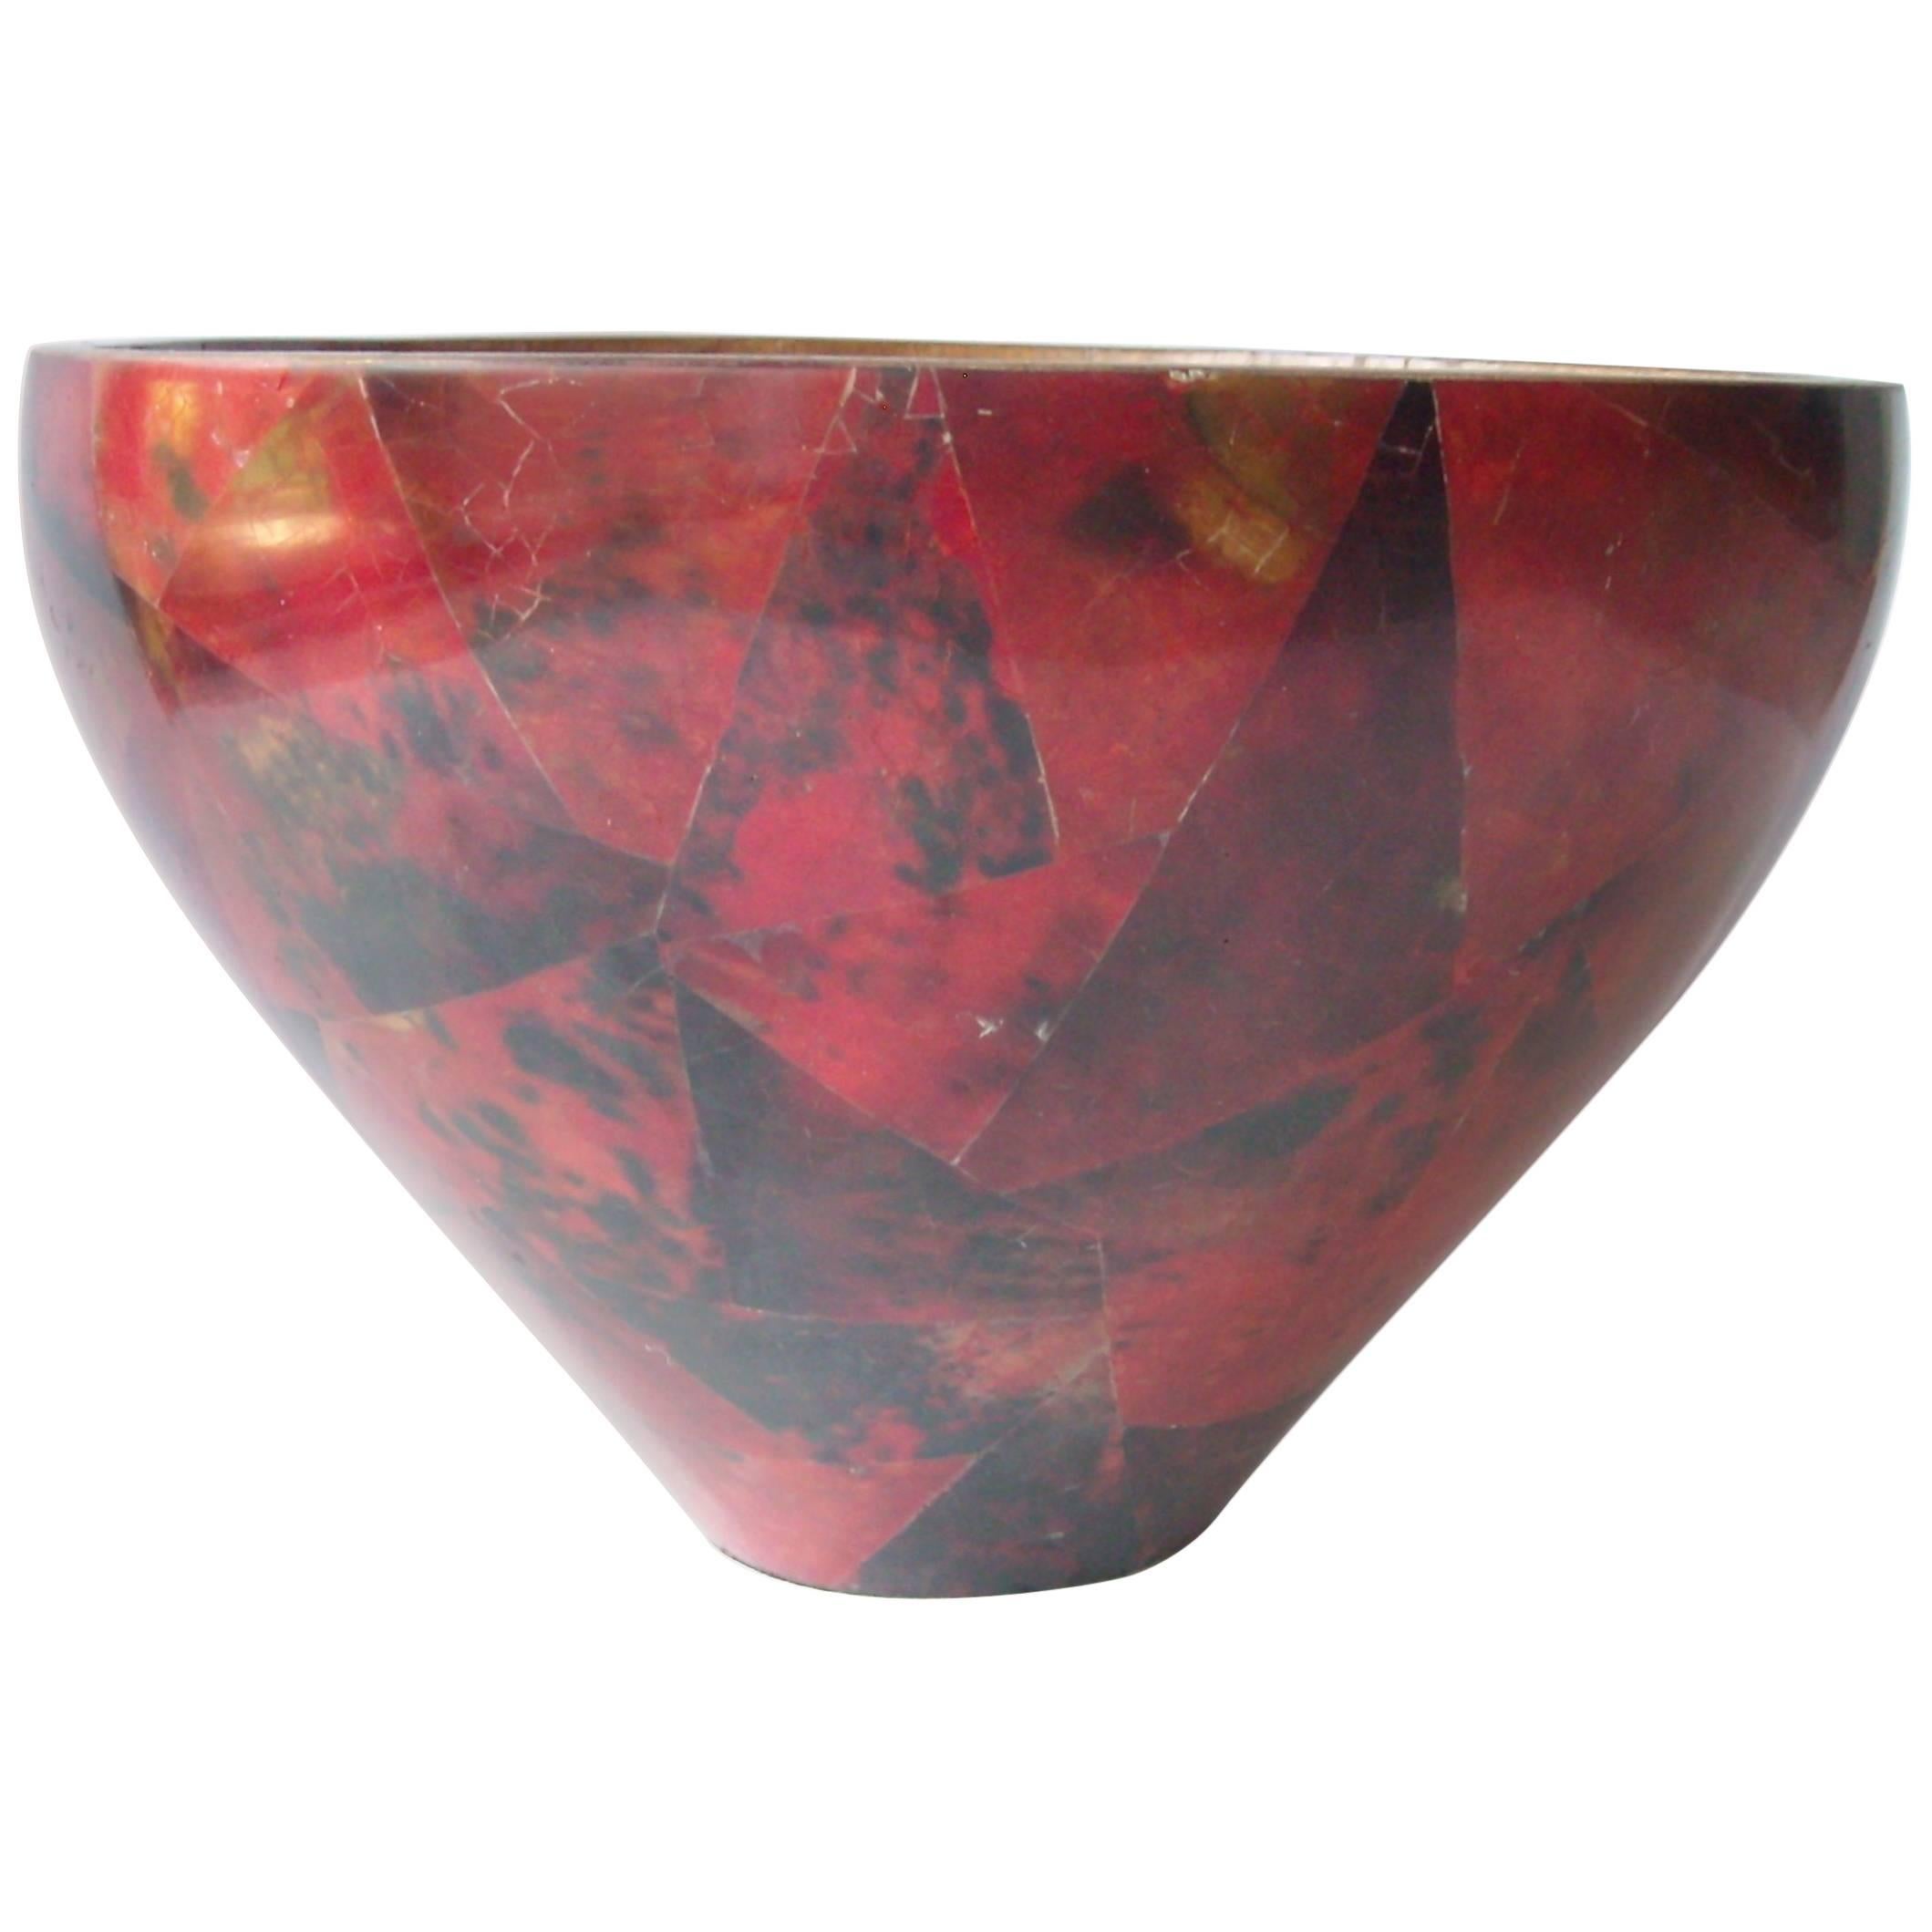 R & Y Augousti Centrepiece, Parchment, Bowl, Red Black, Lacquered, Stamped